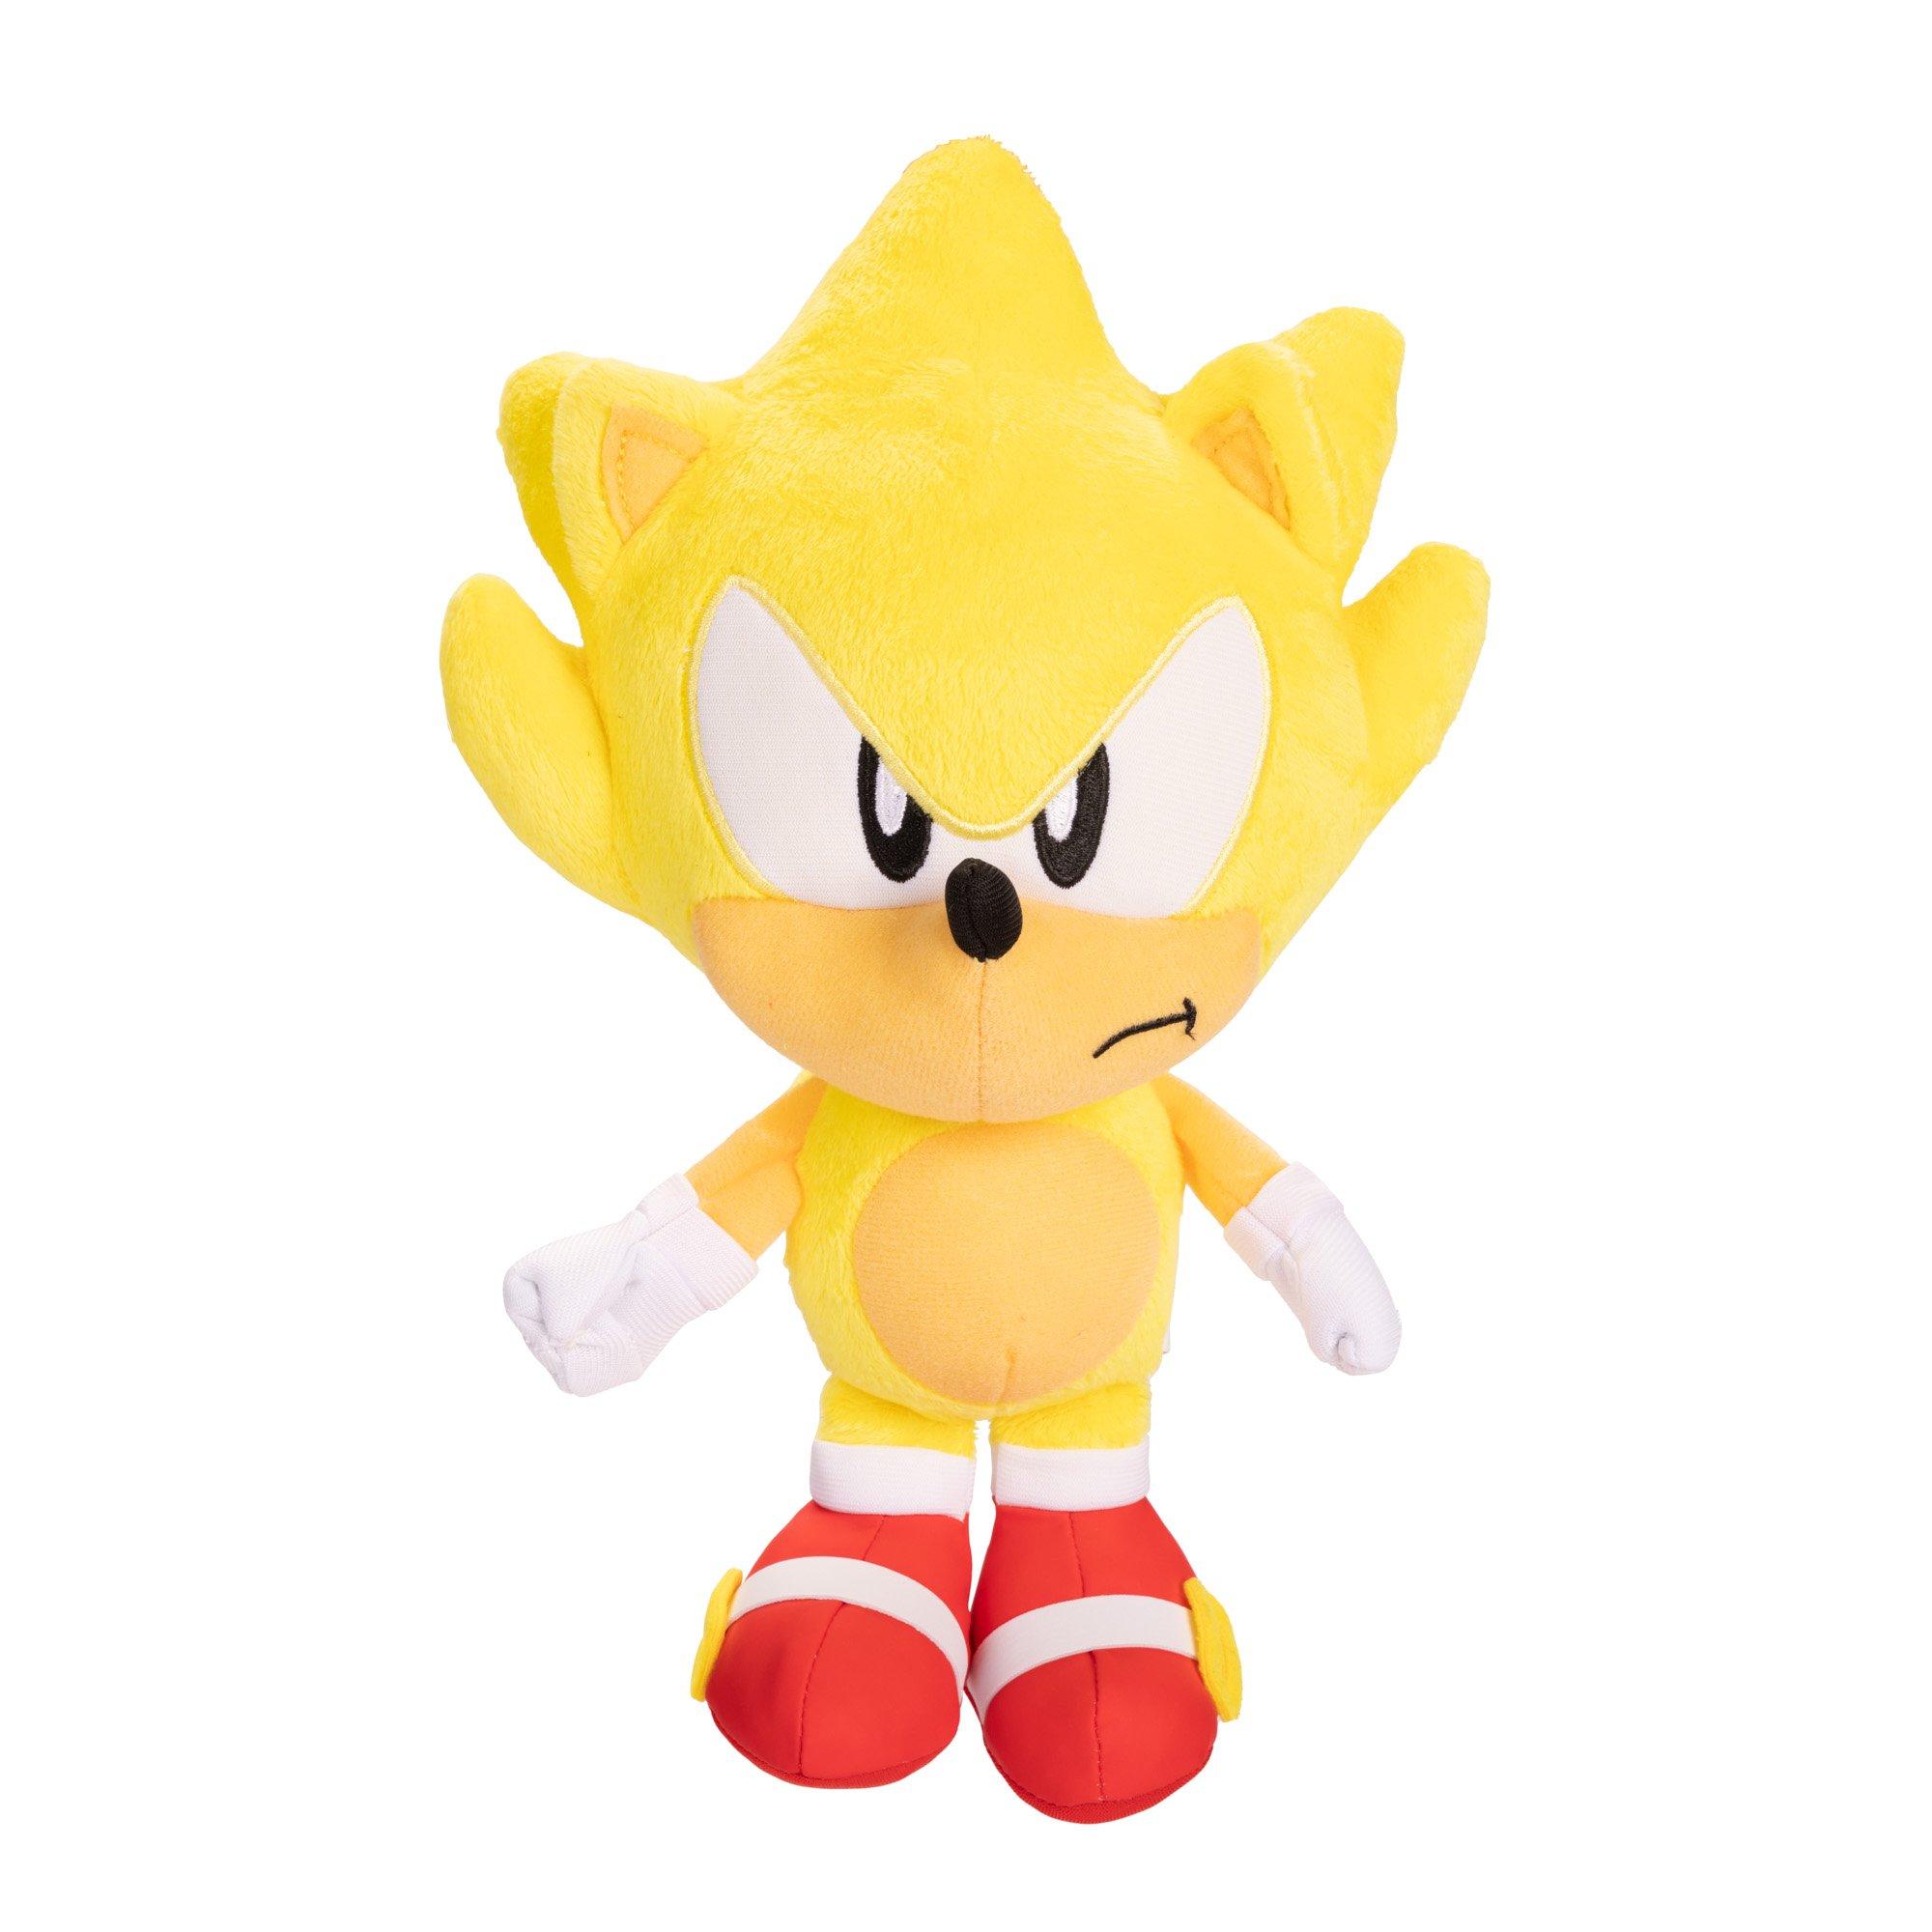 Jakks Pacific Sonic the Hedgehog 9-in Plush (Styles May Vary)